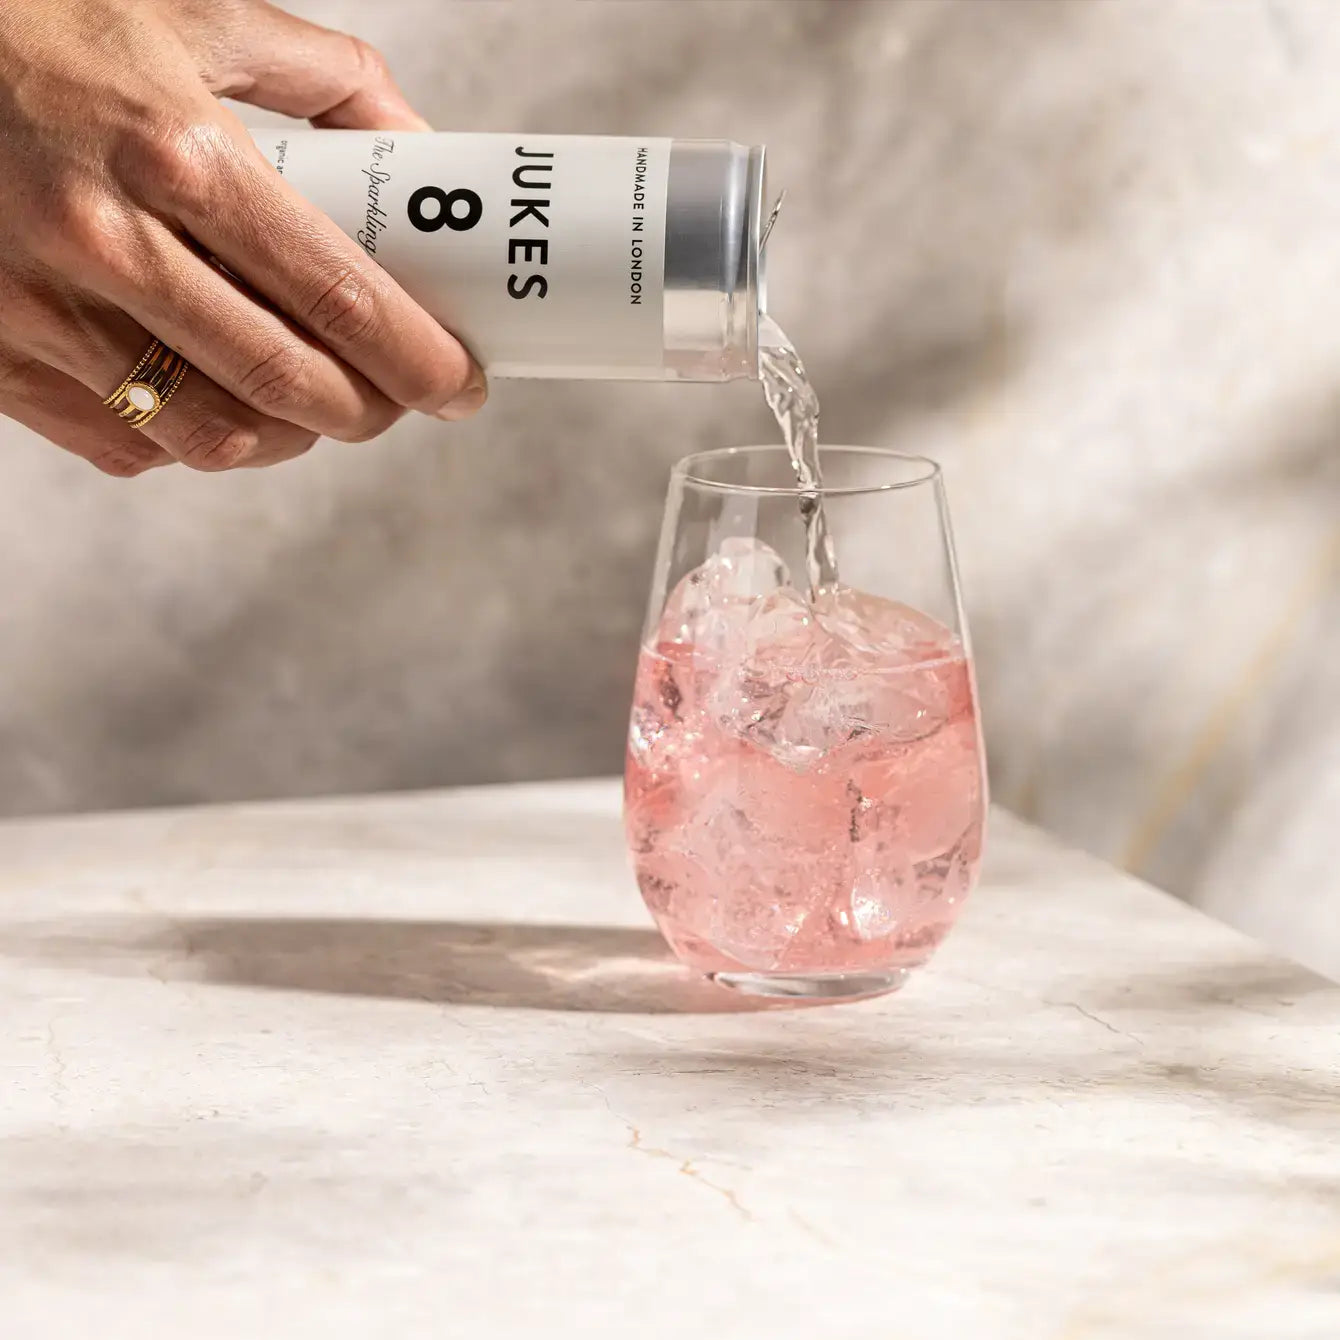 The Sparkling Rosé is an organic apple cider vinegar-based dry drink with 0.0% alcohol and all natural ingredients, by Jukes 8.